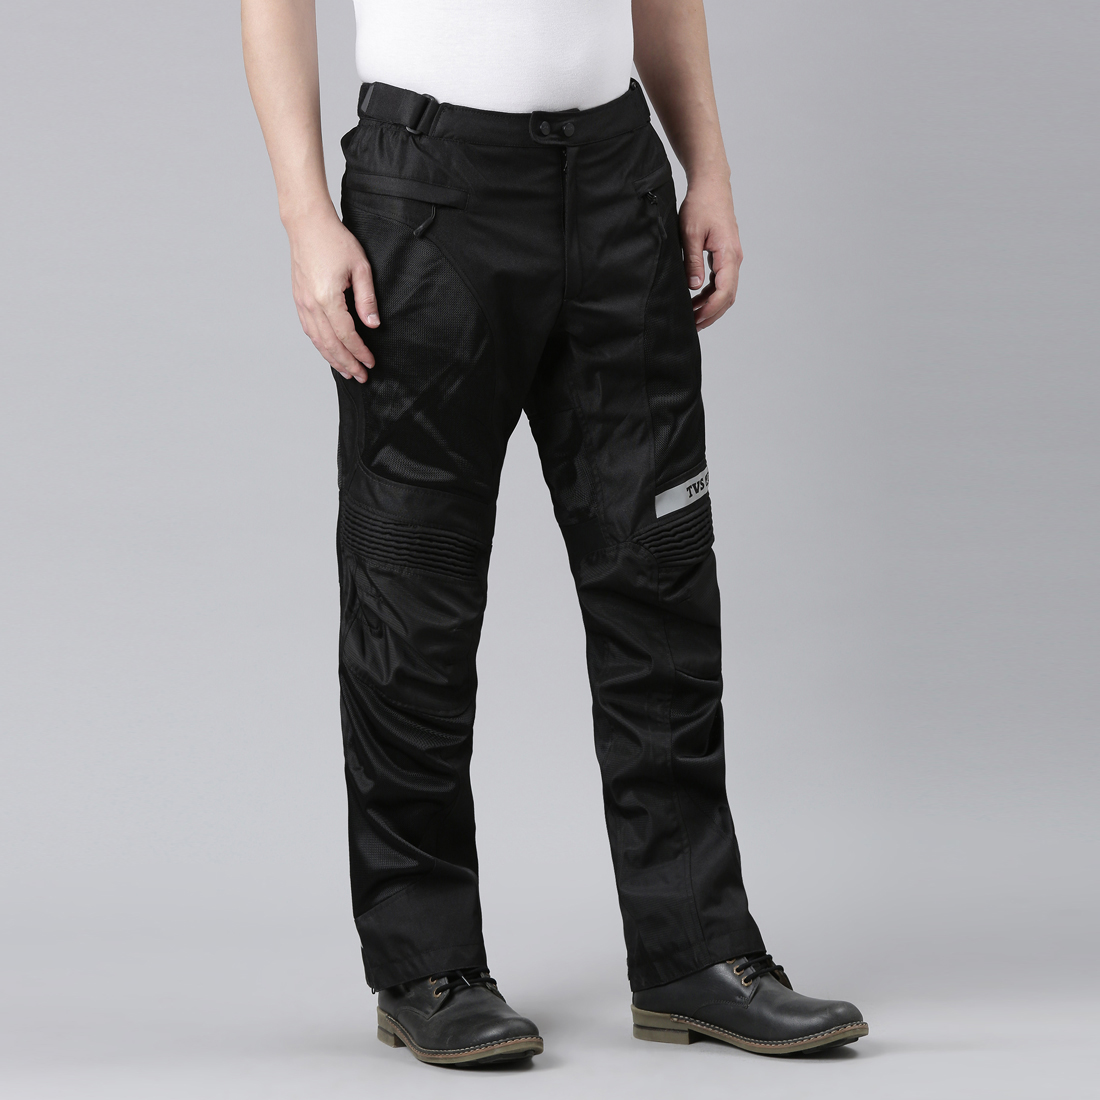 TVS RACING SPRINTER RIDING PANT (CE LEVEL 2) Online at Best Prices ...